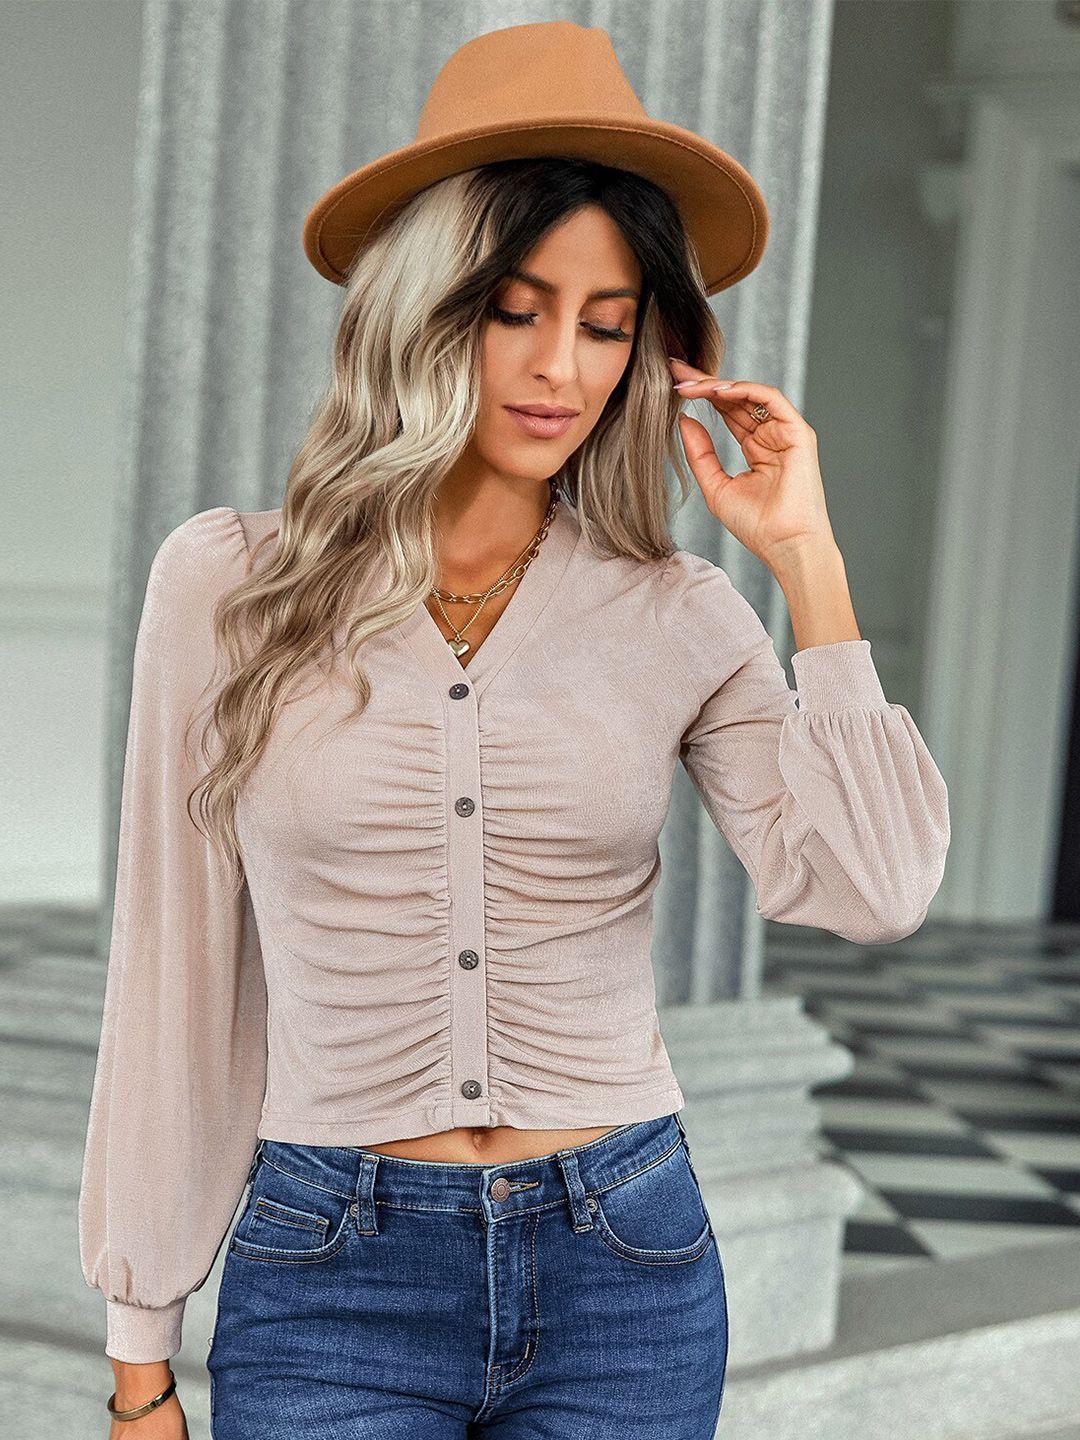 stylecast beige gathered shirt style top